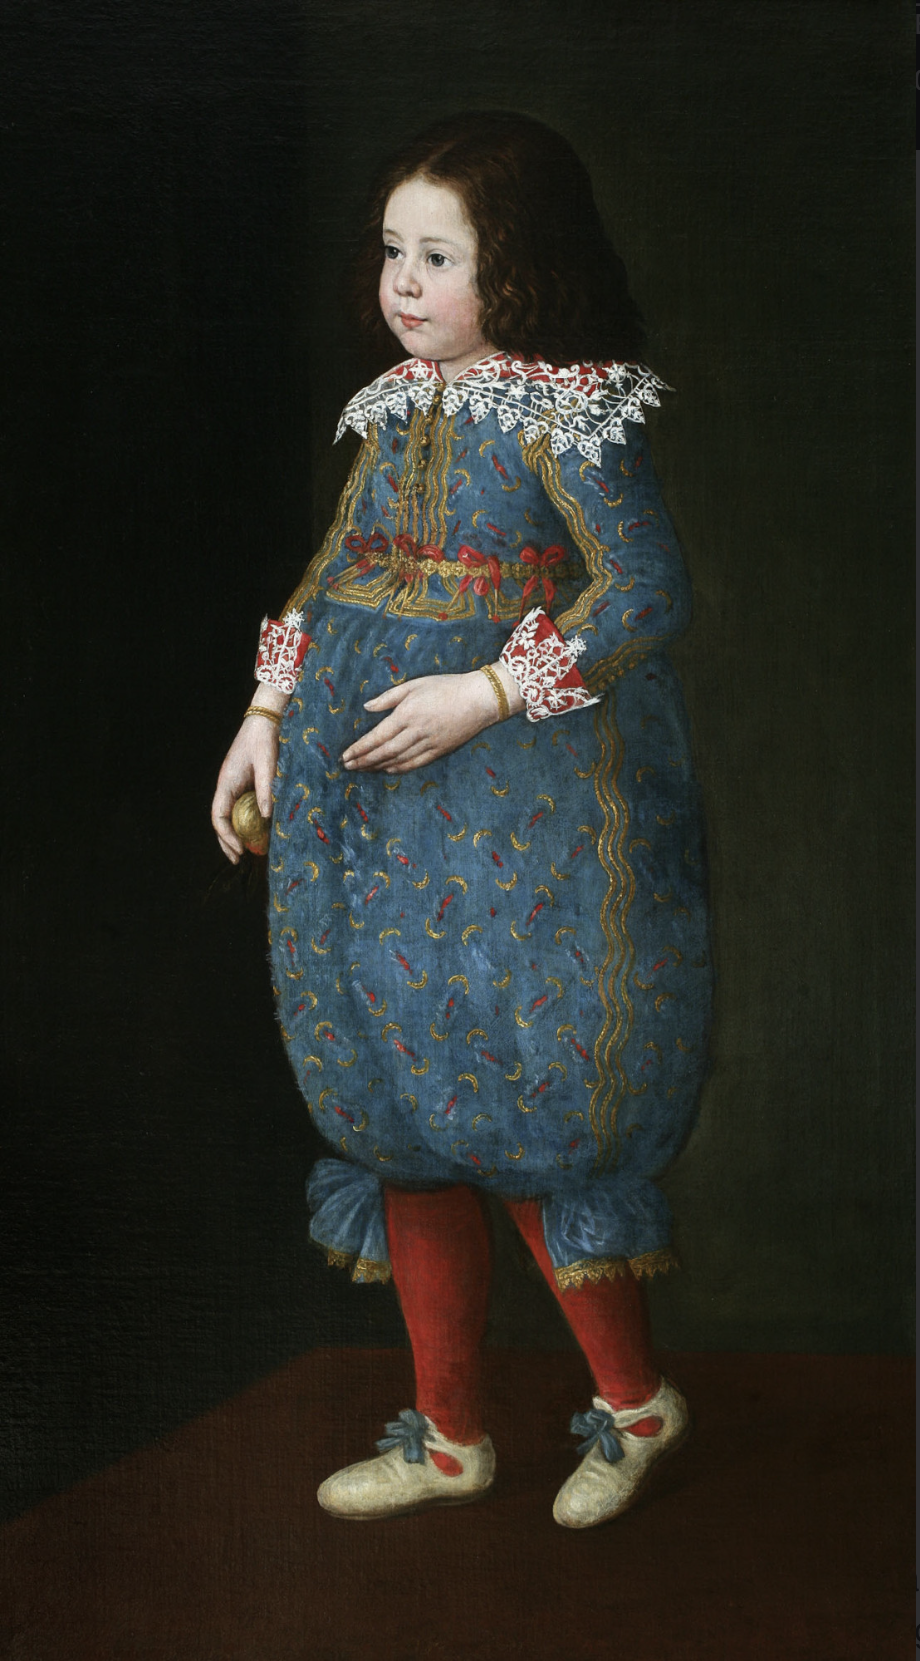 A full-length portrait of a boy wearing an elaborate costume that includes embroidered blue pantaloons with red stockings. He has lace on his collar and at his sleeves. He has long, curly hair past his shoulders. The background is dark and neutral, and the boy looks off to the left side of the canvas.